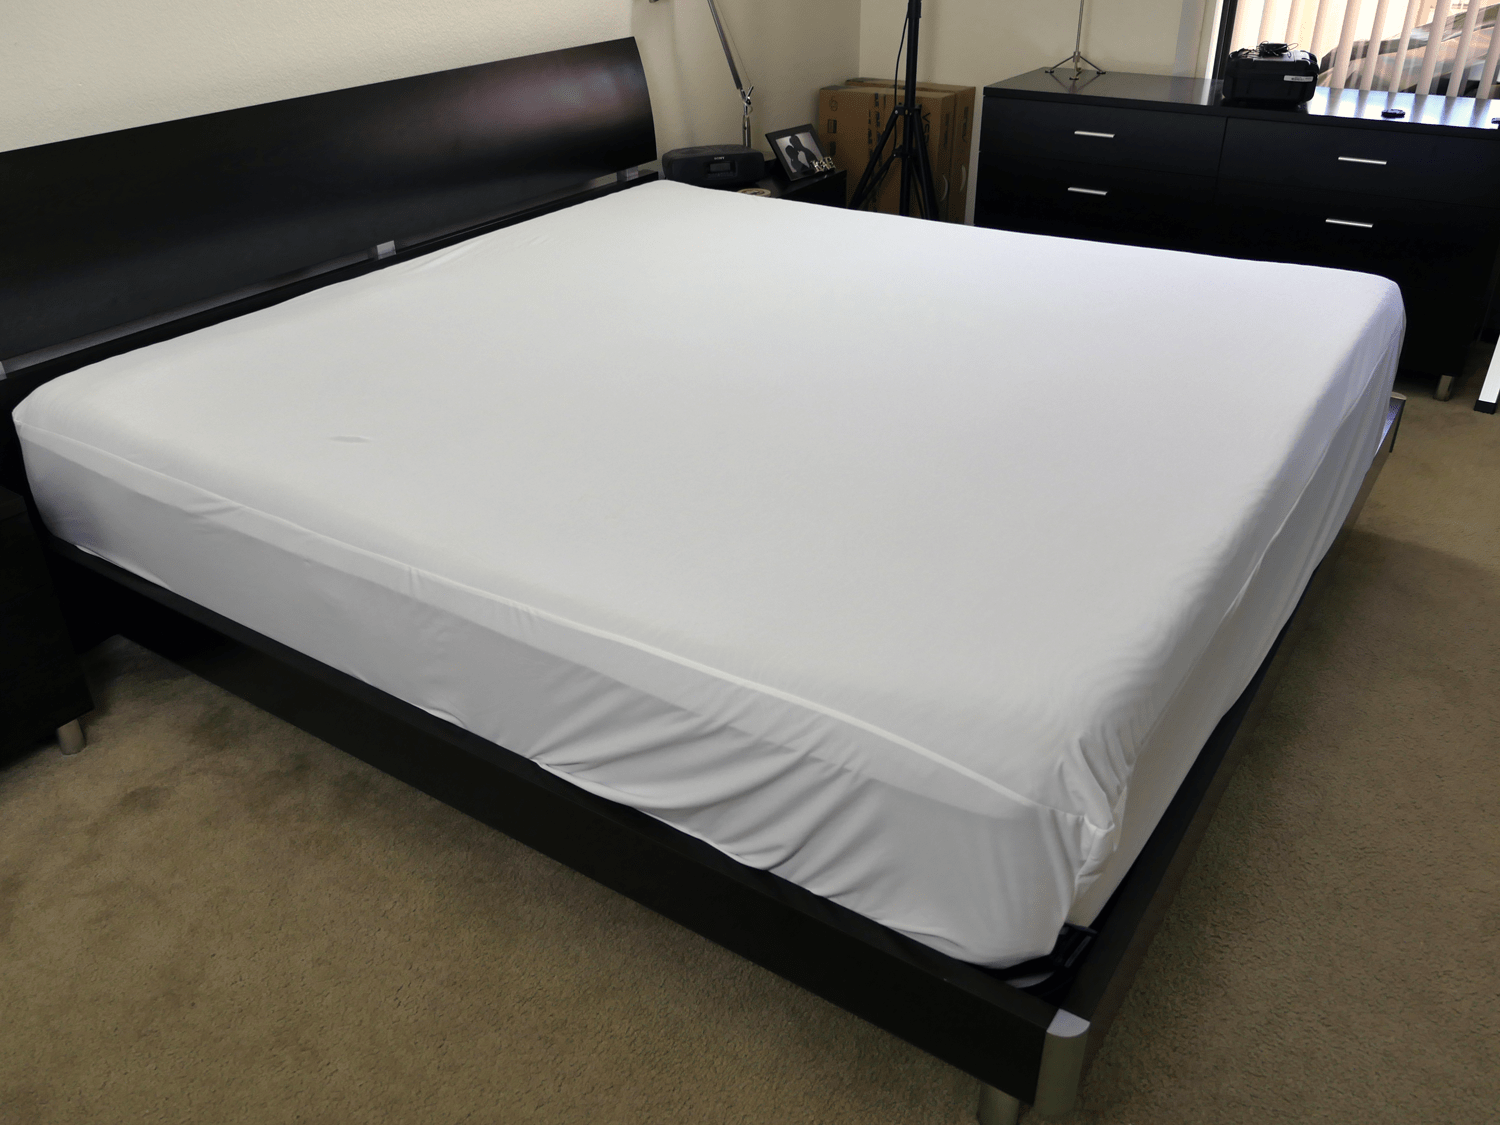 NEW QUILTED MATTRESS MATTRESS PROTECTOR FITTED BED COVER:ALL SIZES DOUBLE KING 